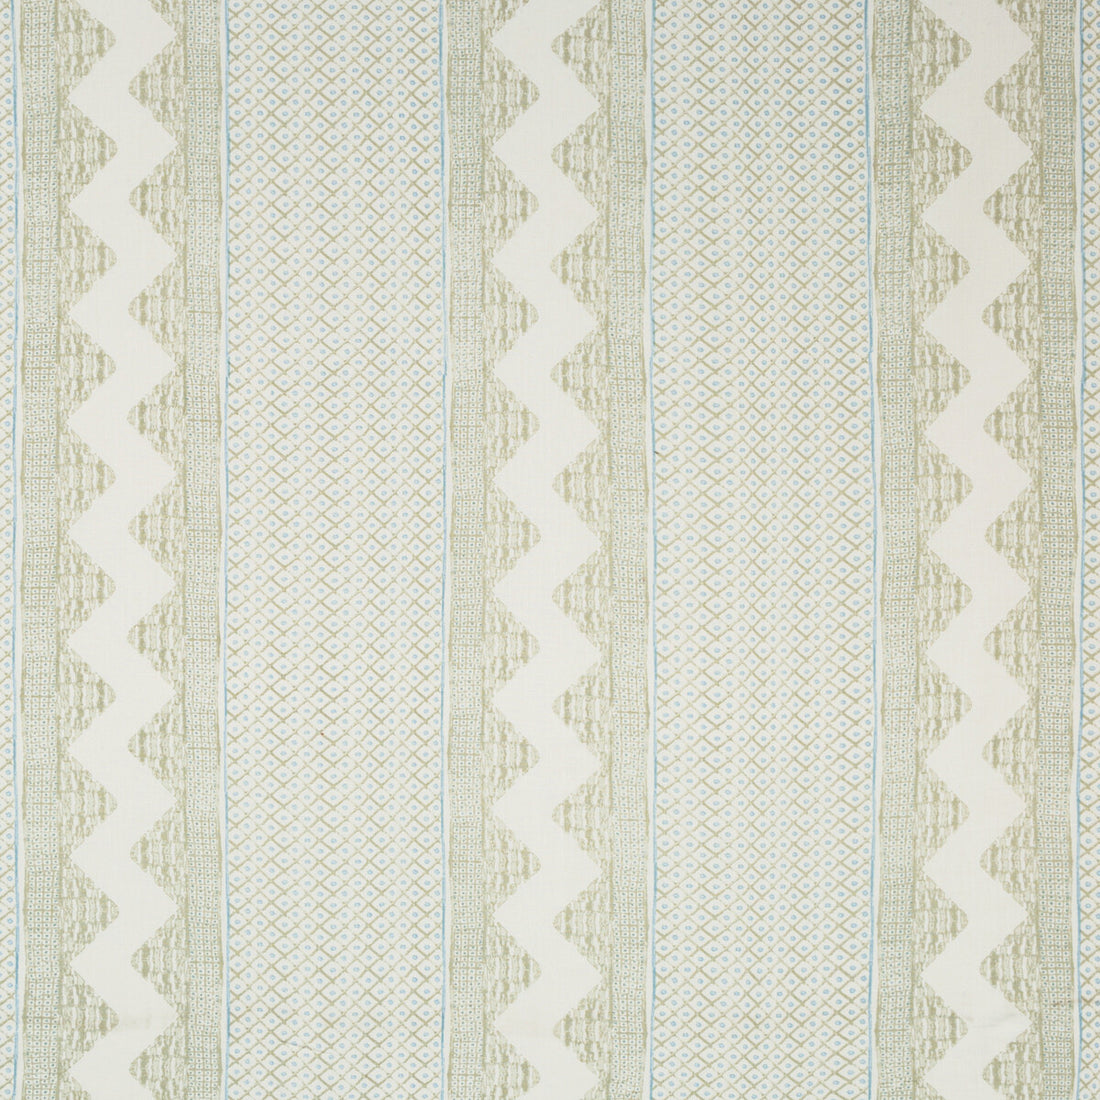 Whitaker Print fabric in sage/aqua color - pattern 2020188.2313.0 - by Lee Jofa in the Avondale collection